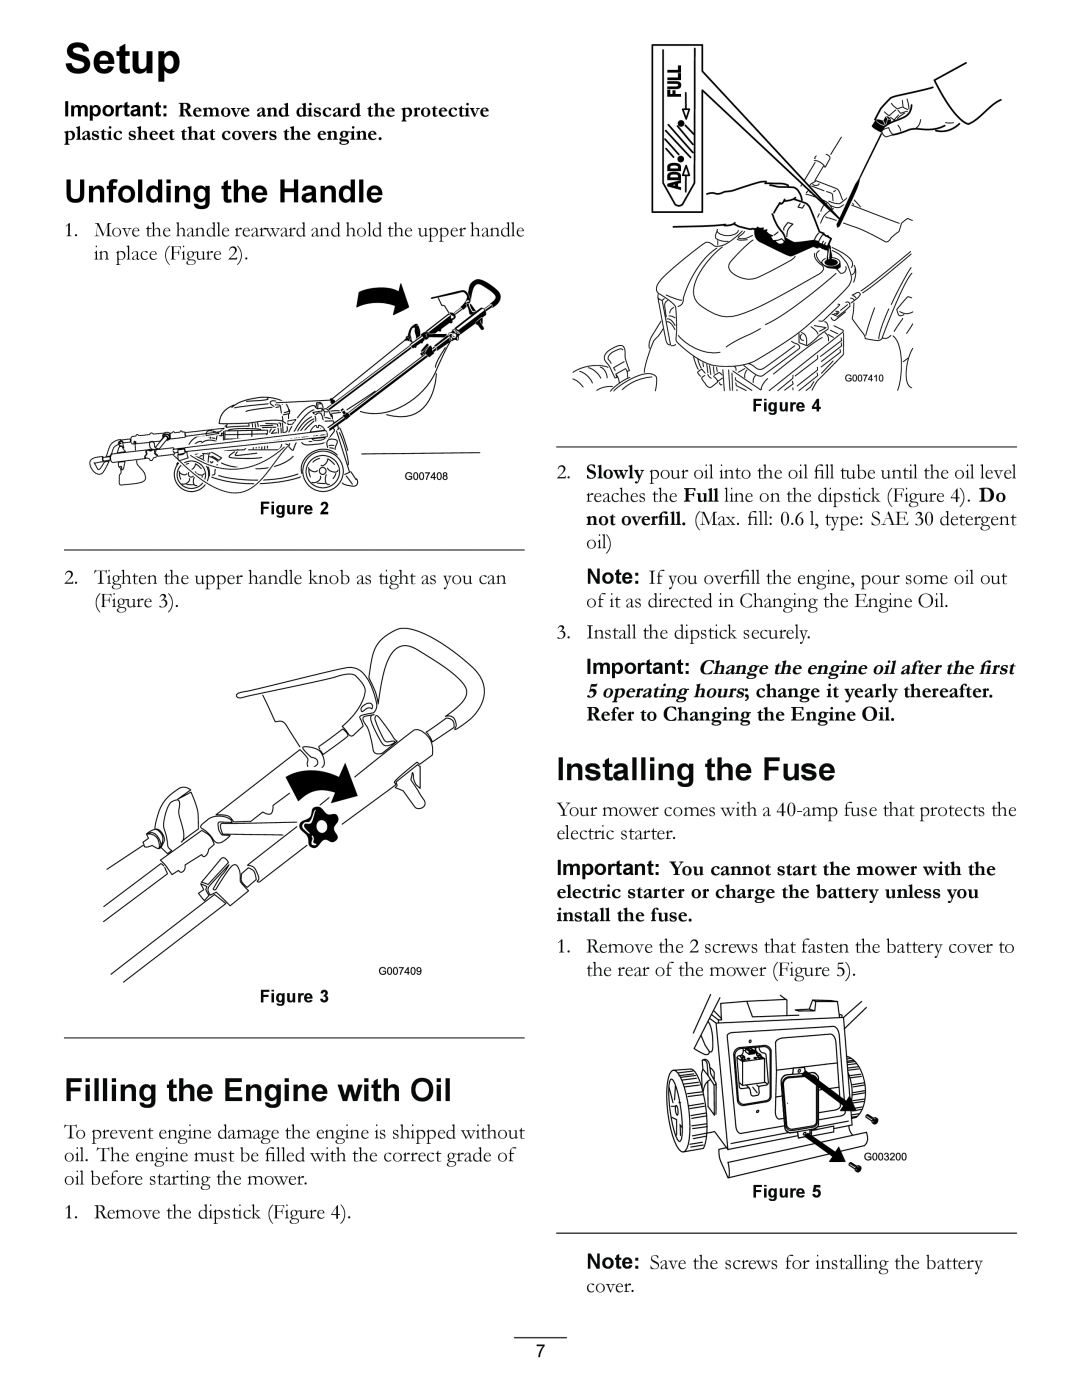 Hayter Mowers R53S manual Setup, Unfolding the Handle, Installing the Fuse, Filling the Engine with Oil 